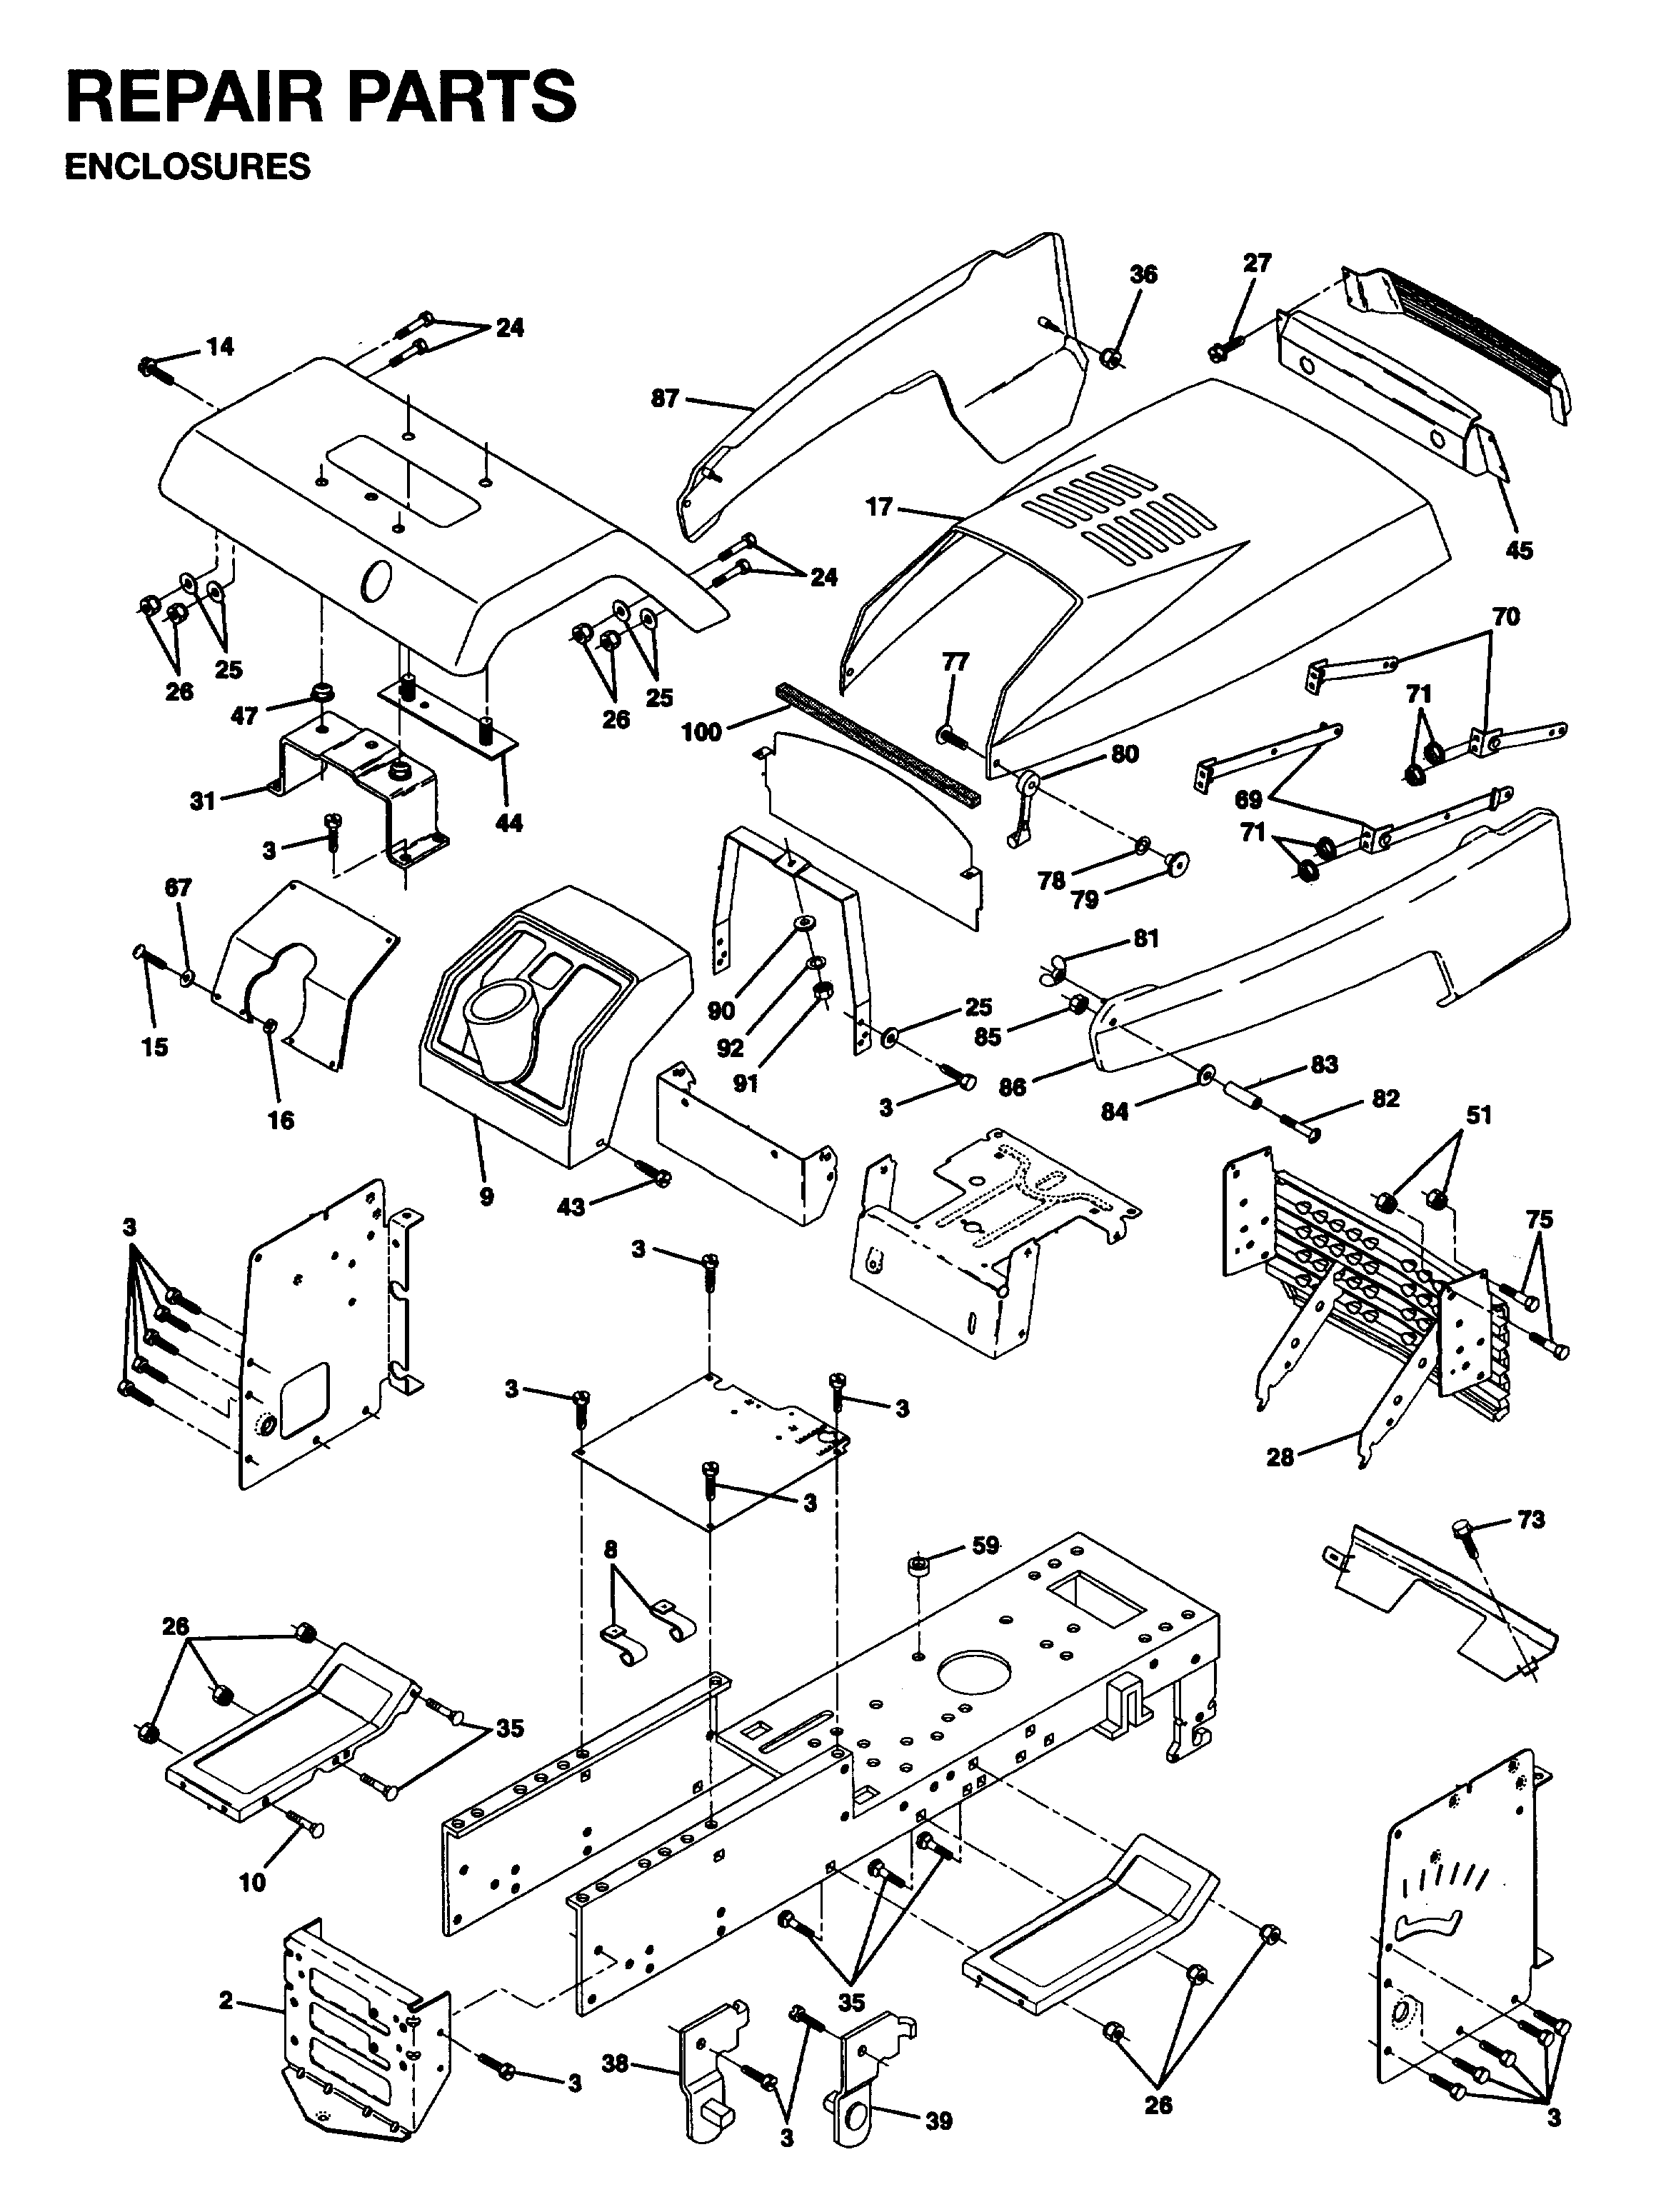 Chassis and appendix 532145009, 874780612, 532126471, 532140398, 872110608, 596564001, 874180512, 596040501, 532144545, 596564401, 734117201, 596322601, 532161464, 532131716, 532137113, 596136001, 532108067, 532139886, 532139887, 532140675, 532124392, 532105531, 586668901, 532110436, 734116301, 532106784, 532155013, 586668901, 596437001, 533304086, 871191008, 810071000, 596987401, 532109808, 532146525, 874981024, 532007206, 734114601, 873271000, 532144547, 532144548, 734115441, 532050675, 596029801, 532105037, 532121794